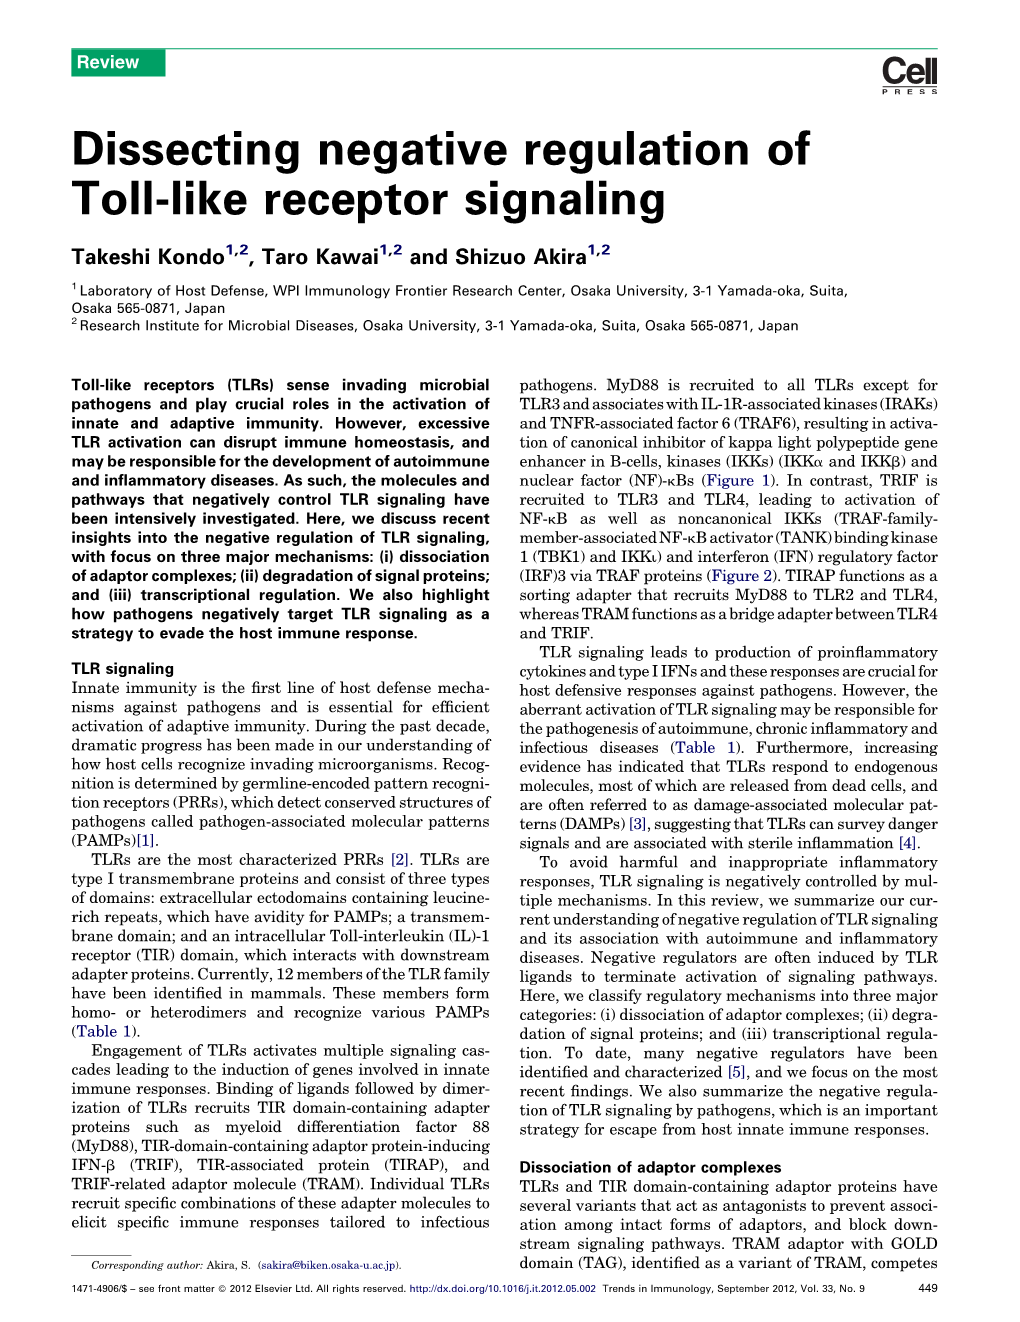 Dissecting Negative Regulation of Toll-Like Receptor Signaling